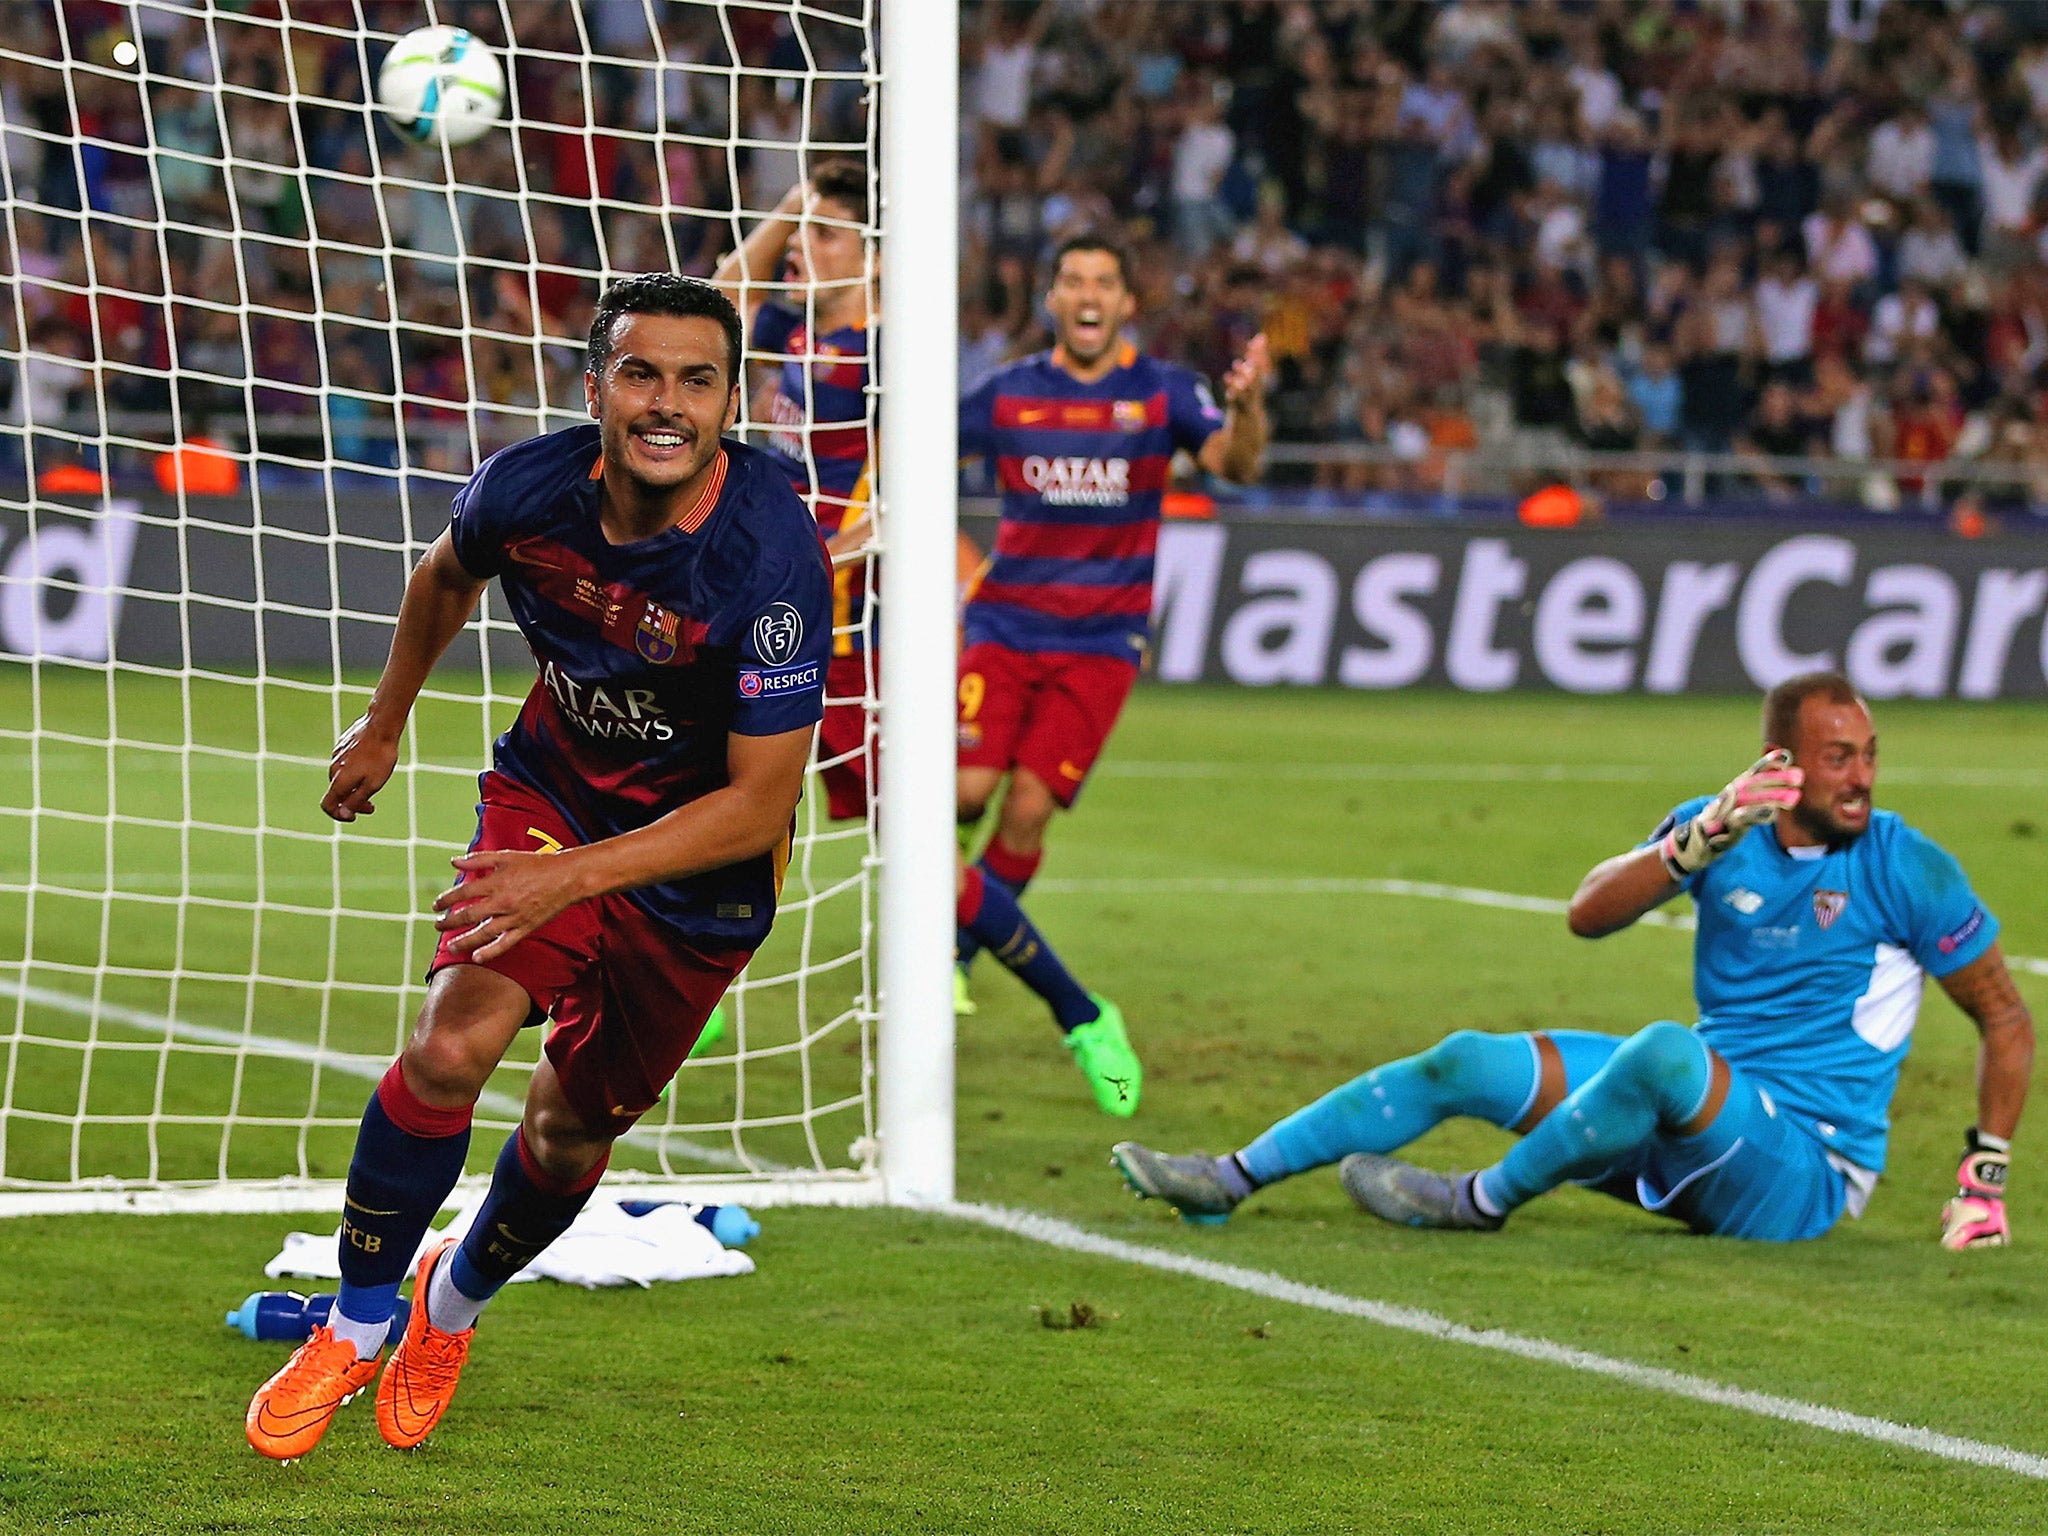 Pedro scored Barcelona's winner as they beat Sevilla 5-4 in the UEFA Super Cup on Tuesday night